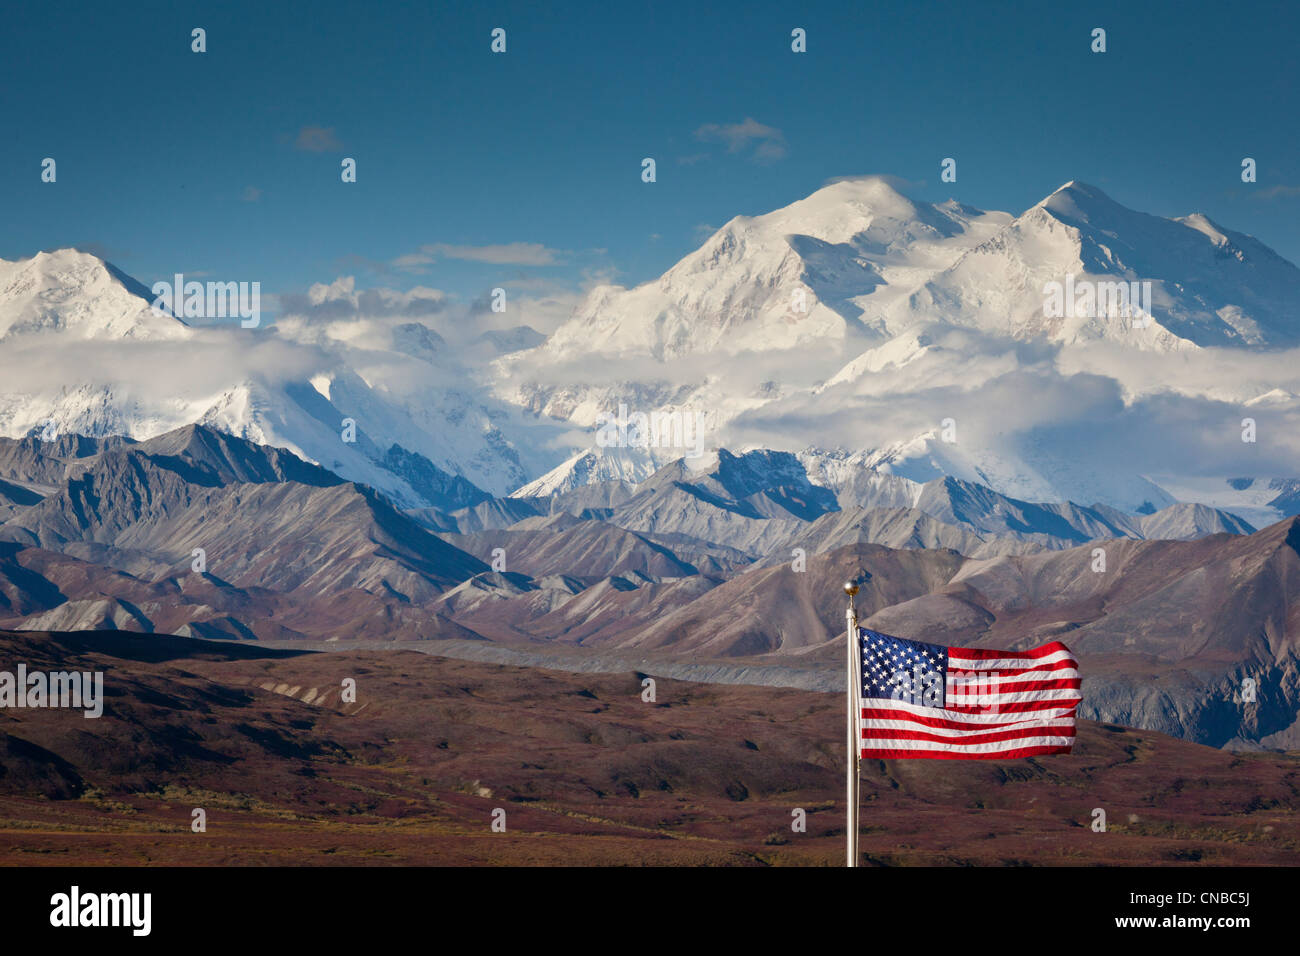 An American flag flys in the wind at Eielson Visitor Center with Mt. Mckinley in the background,  Denali National Park, Alaska Stock Photo